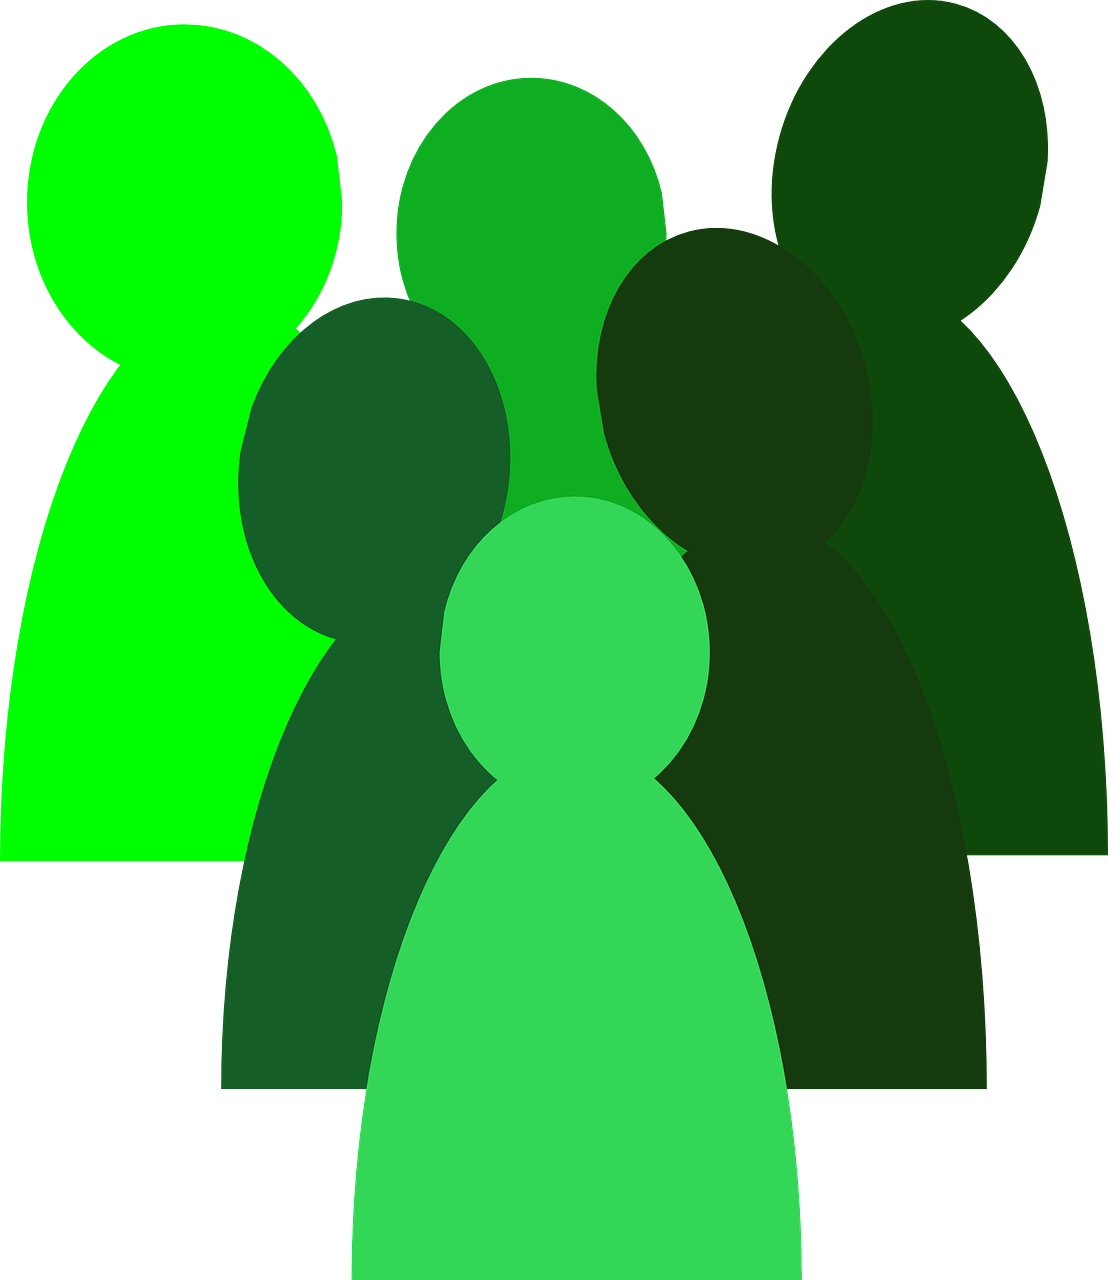 Staff - Icon People Color Green (1108x1280)